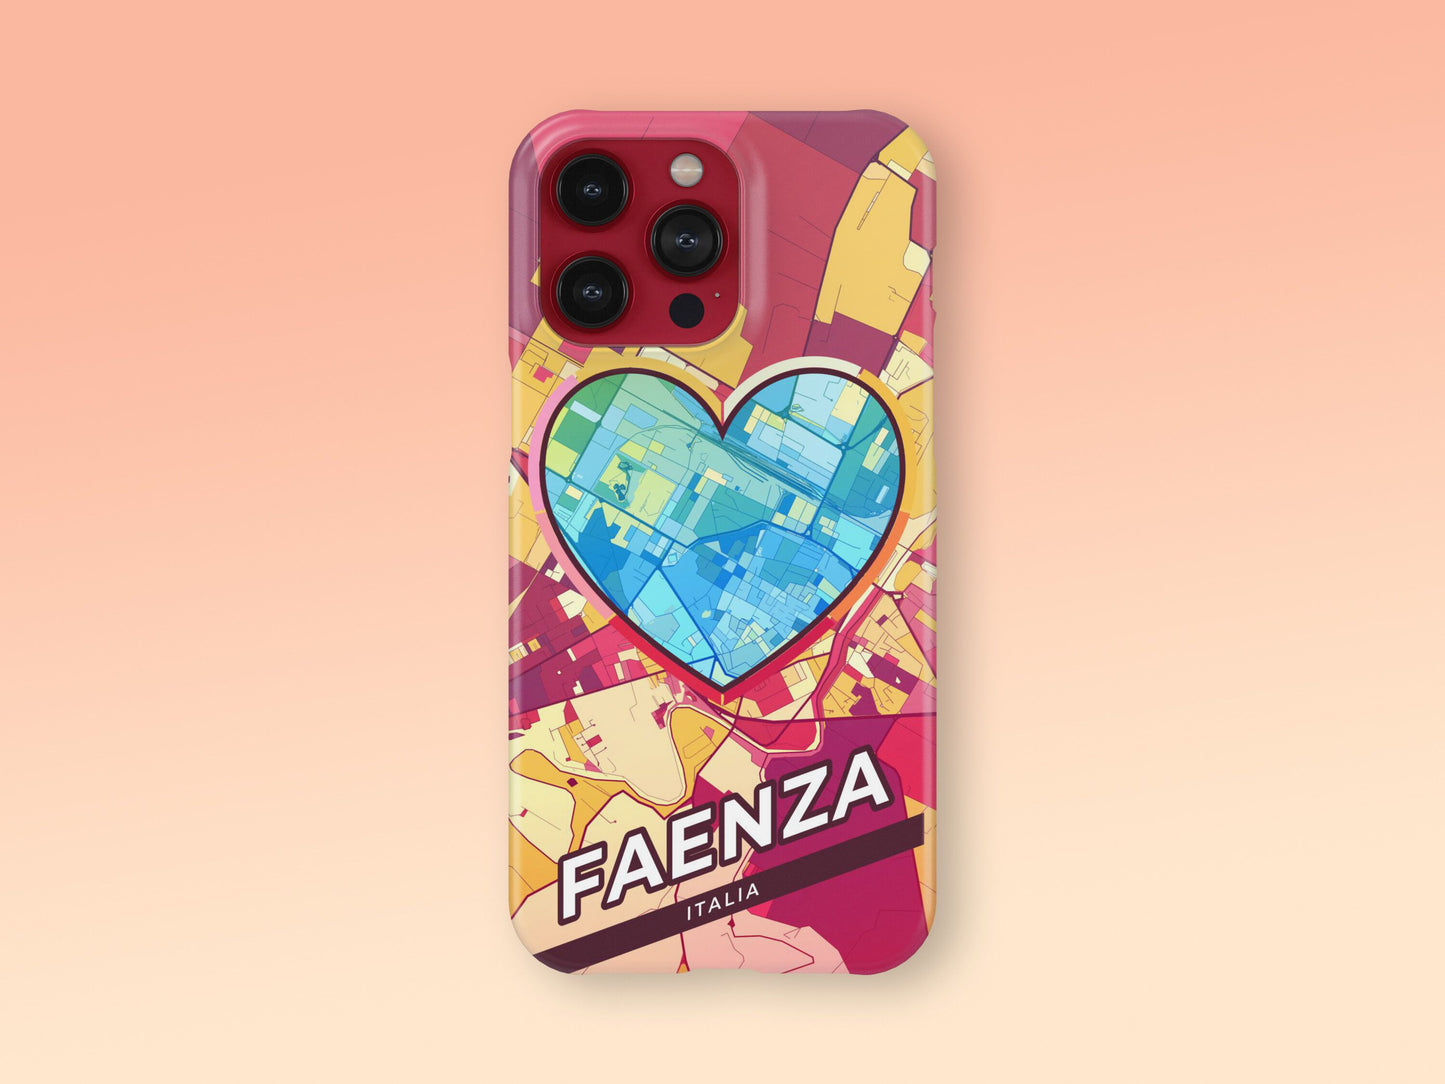 Faenza Italy slim phone case with colorful icon. Birthday, wedding or housewarming gift. Couple match cases. 2